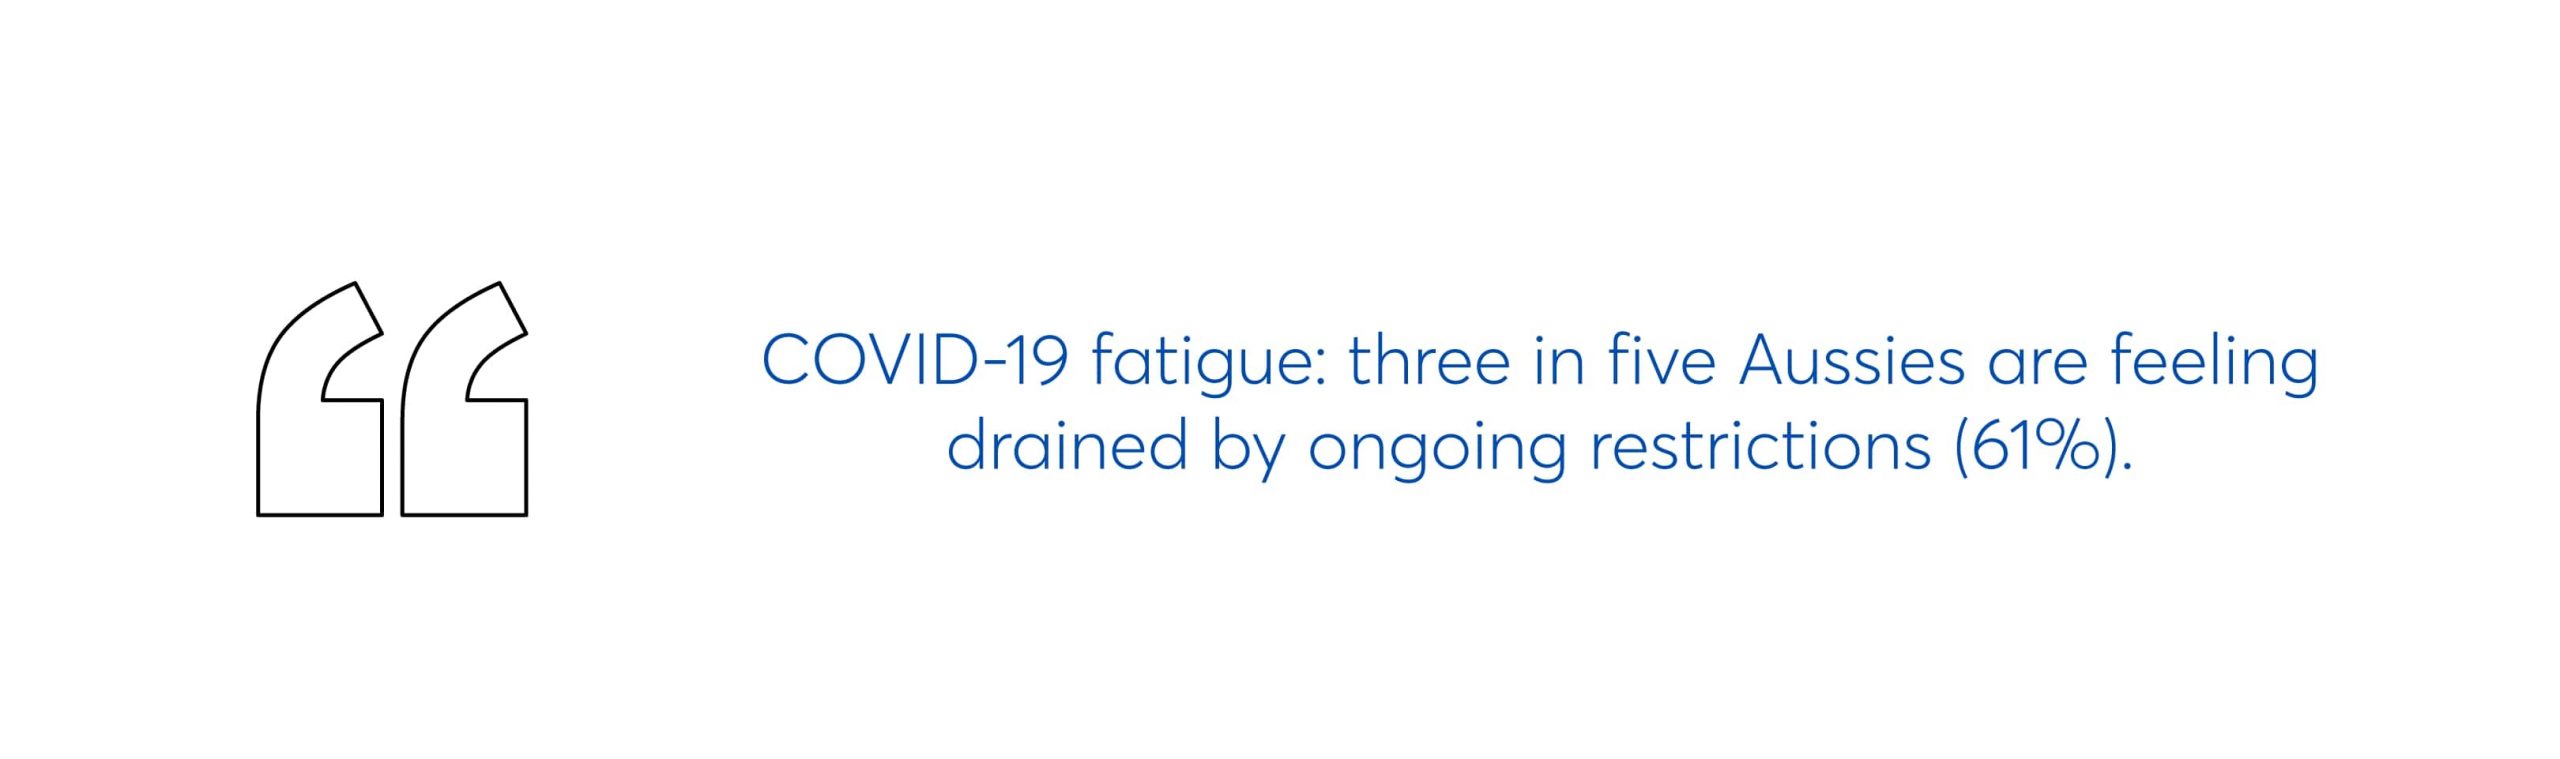 covid-19 fatigue: three in five aussies are feeling drained by ongoing restrictions (61%)